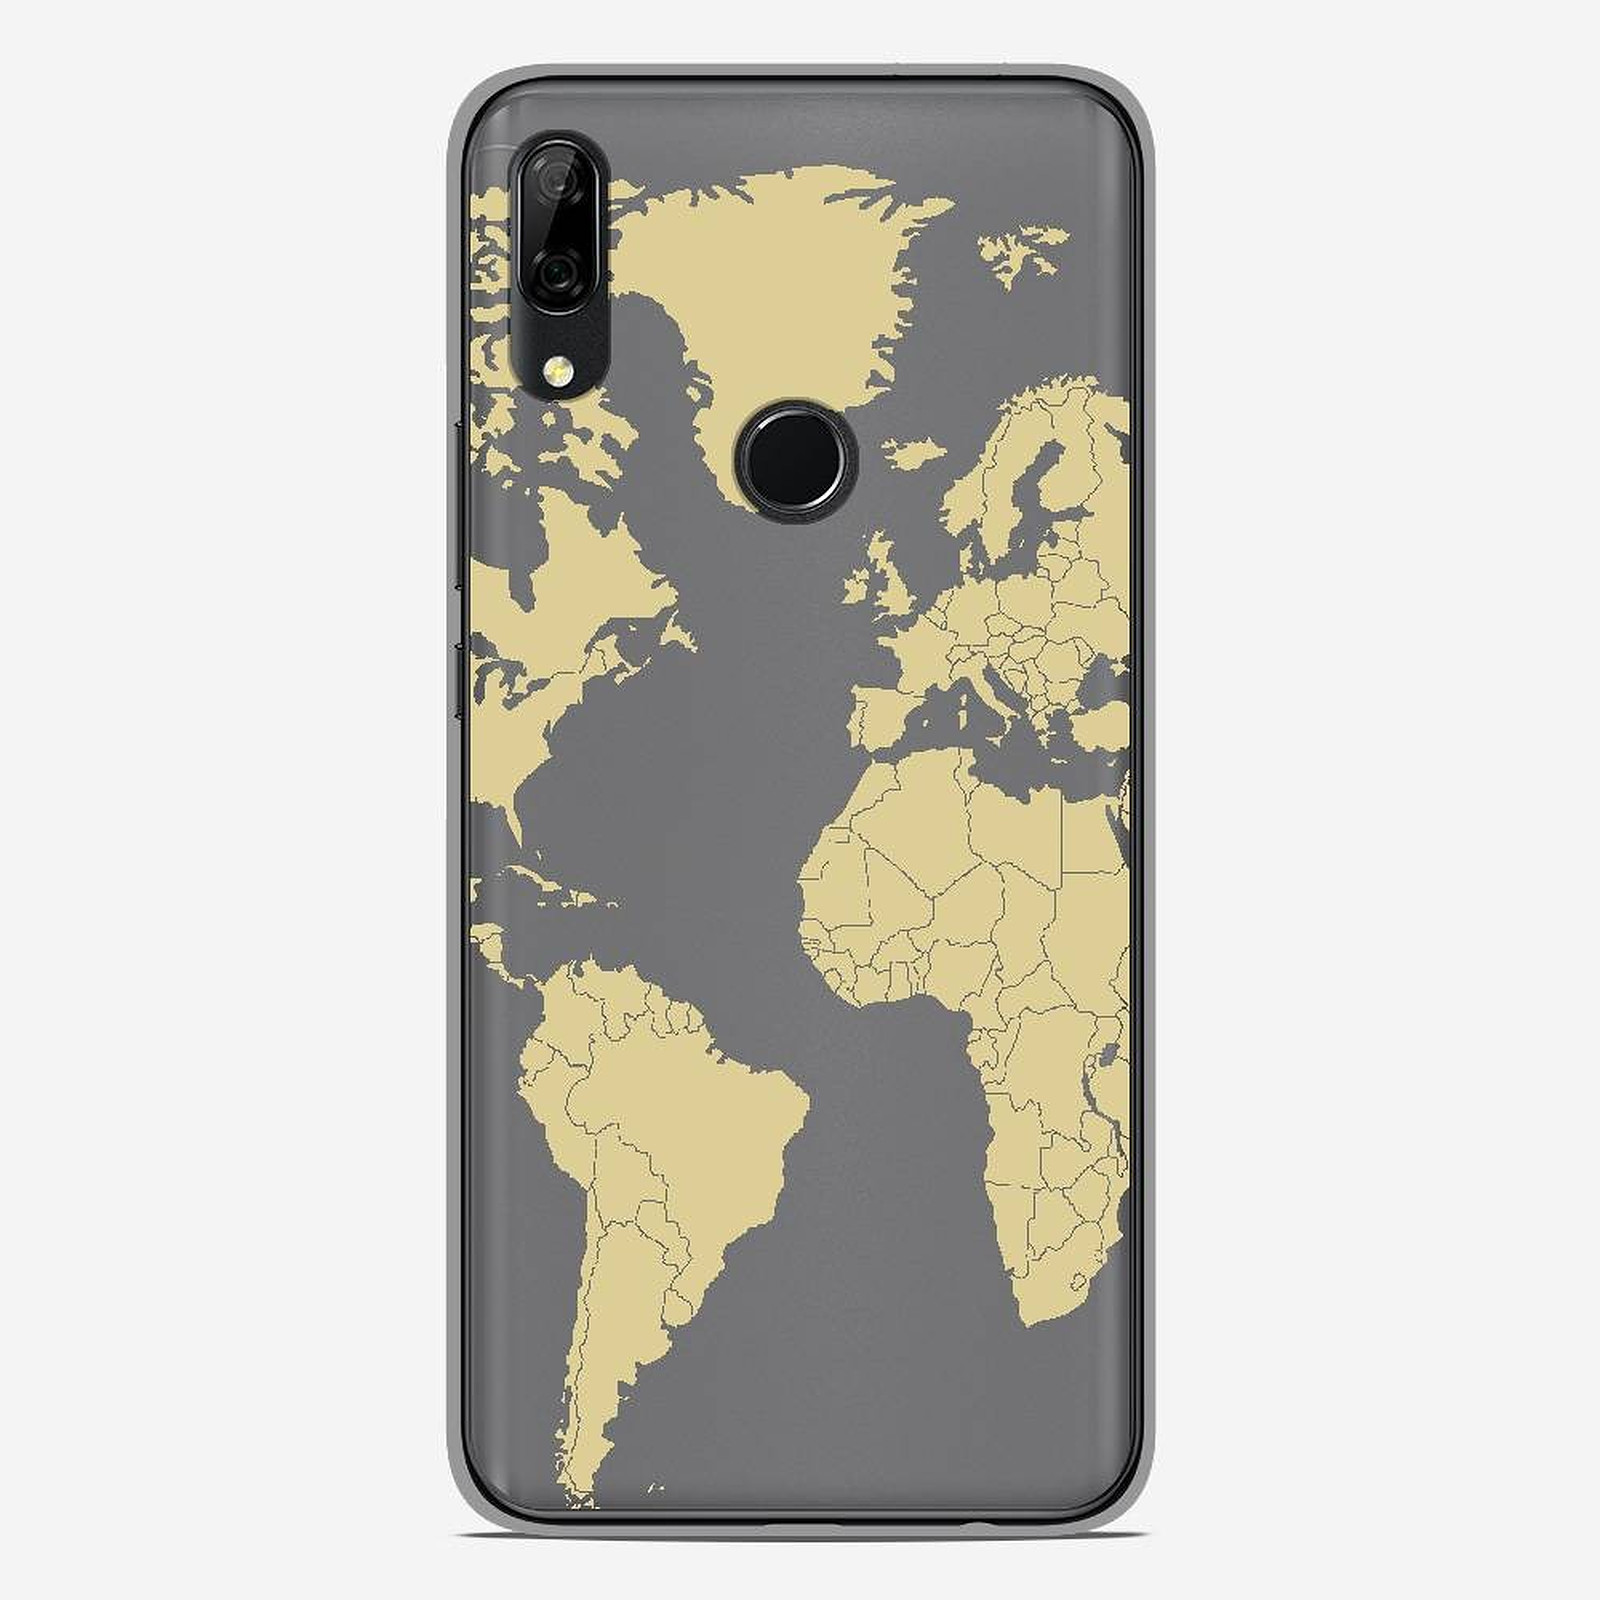 1001 Coques Coque silicone gel Huawei P Smart Z motif Map beige - Coque telephone 1001Coques